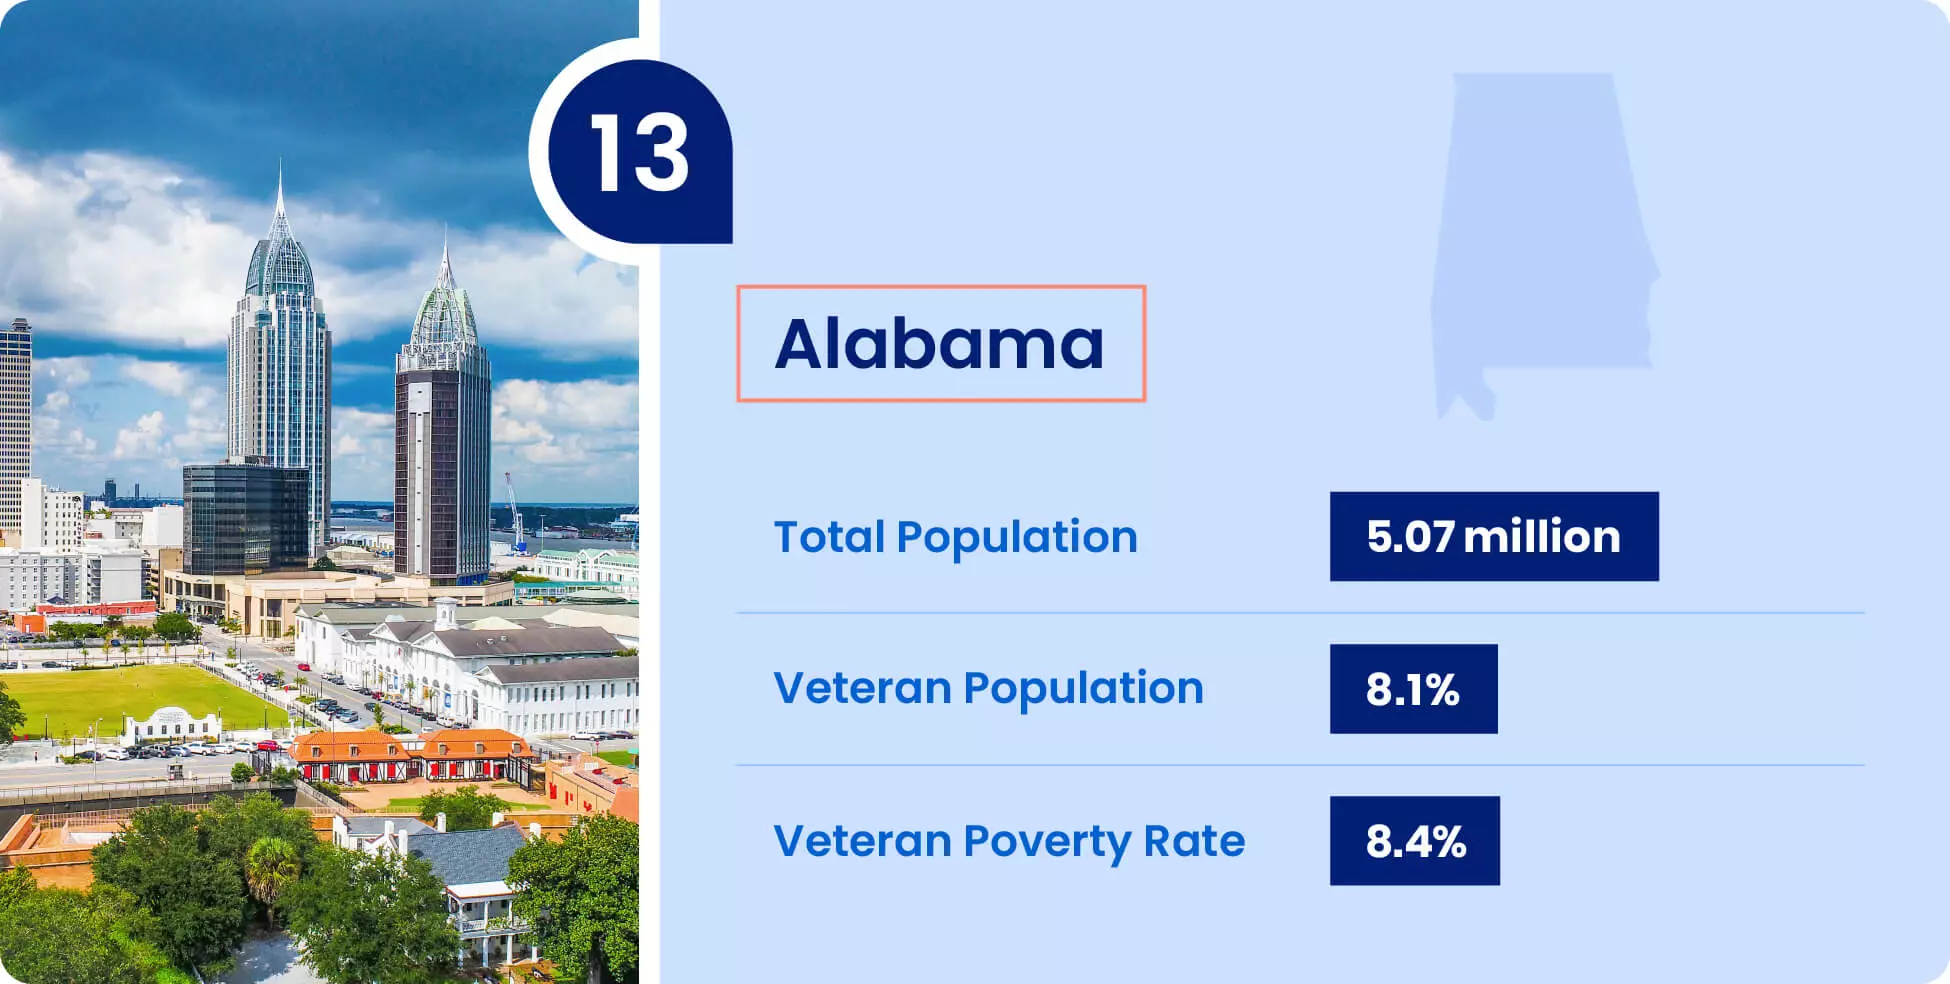 Image shows key information for military retirees thinking of moving to Alabama.